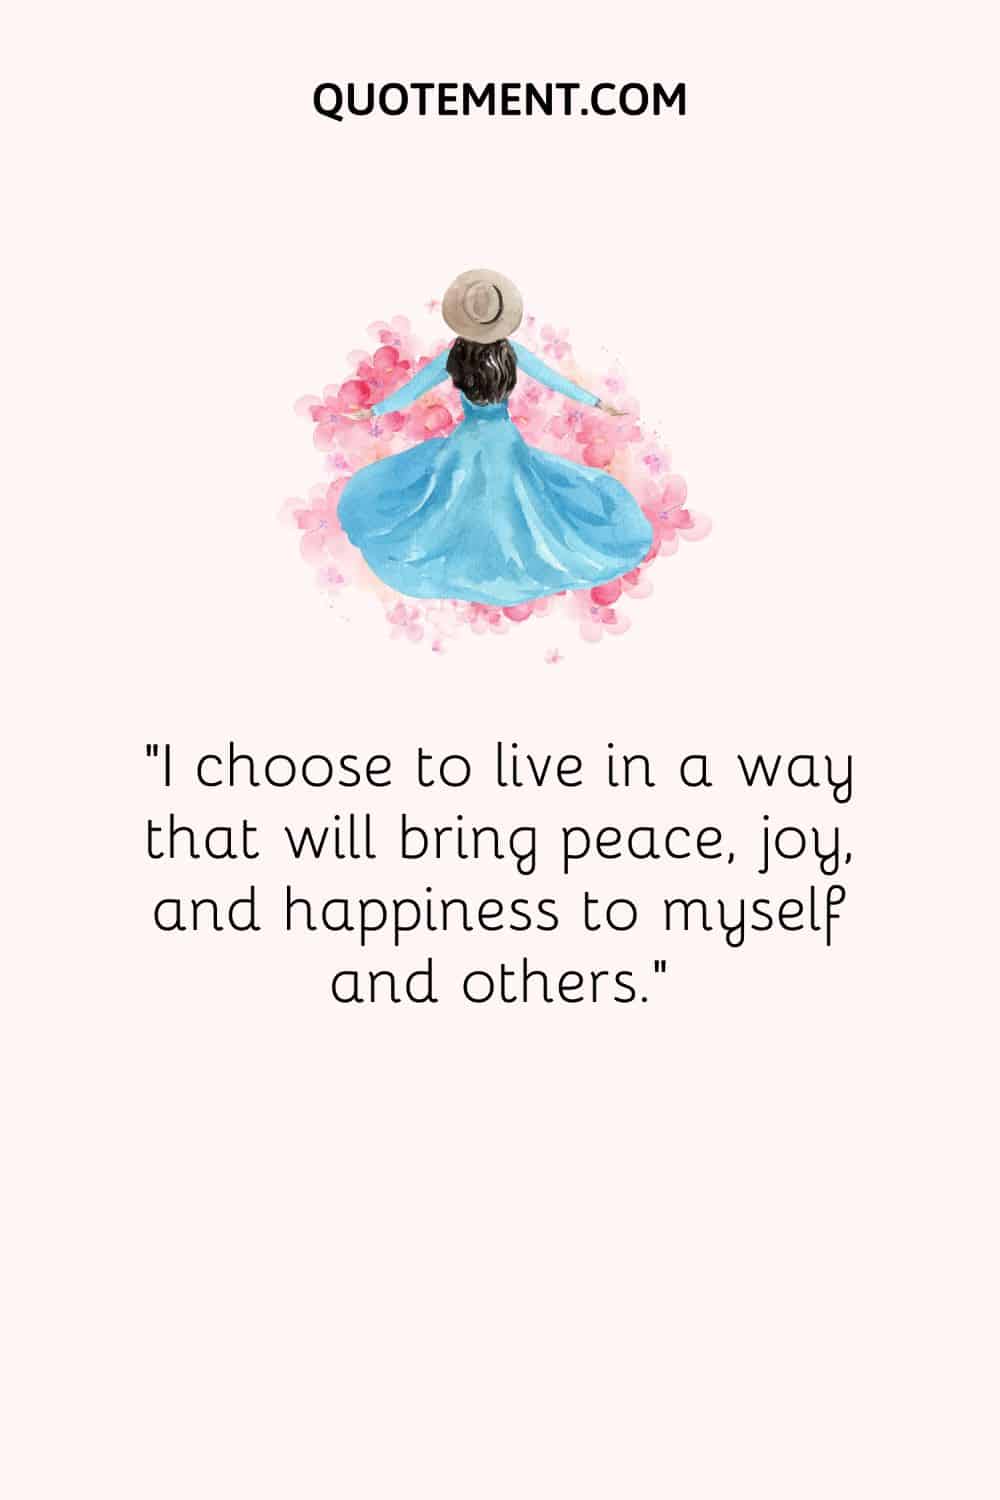 I choose to live in a way that will bring peace, joy, and happiness to myself and others